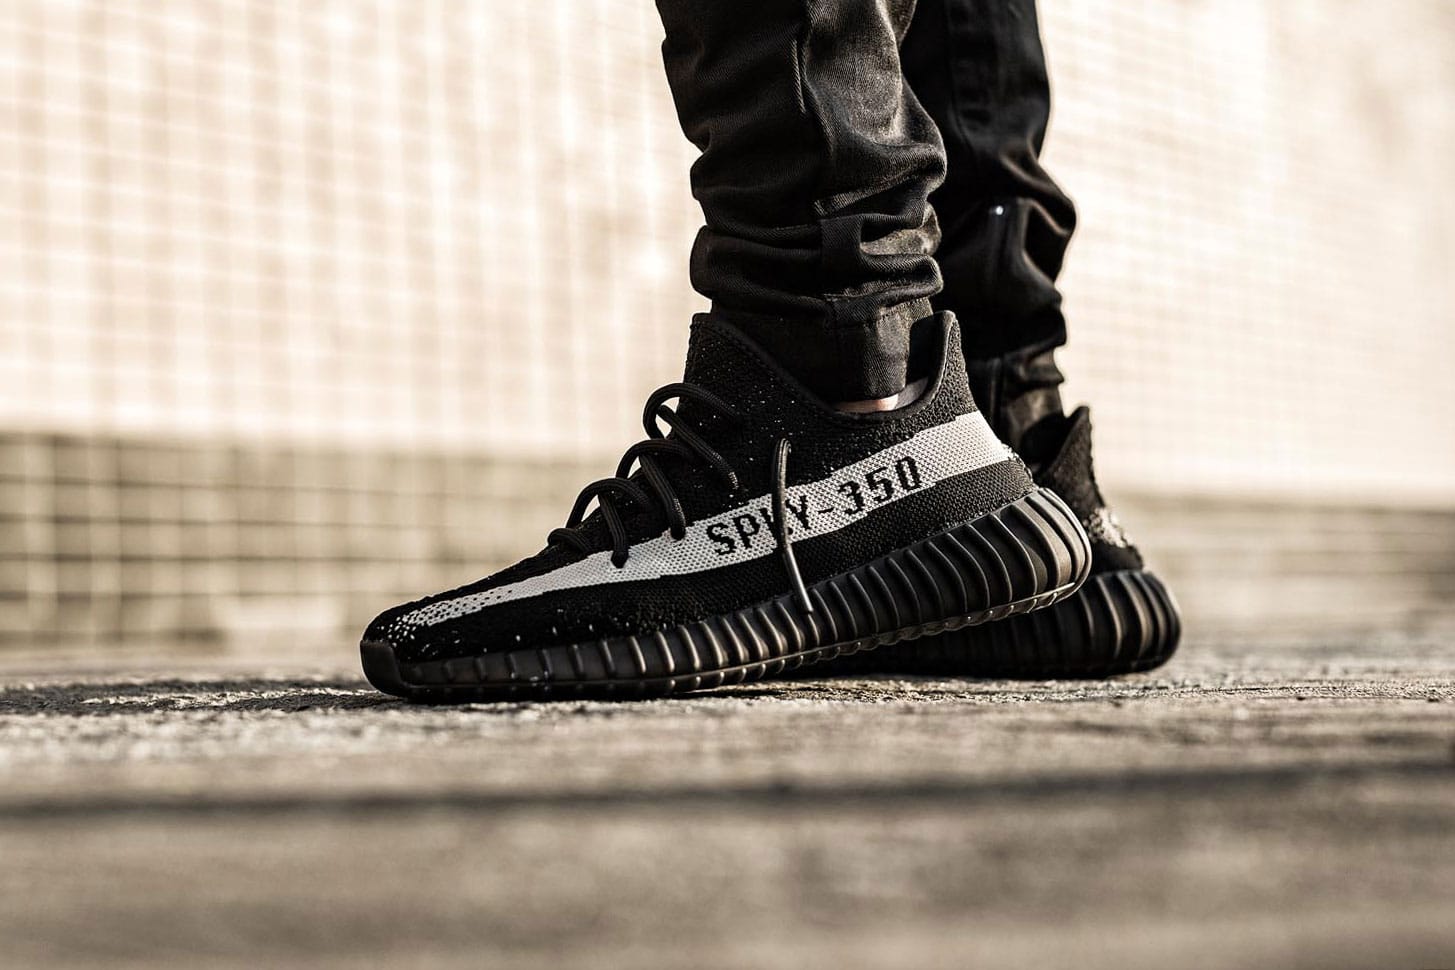 yeezy 350 black and white